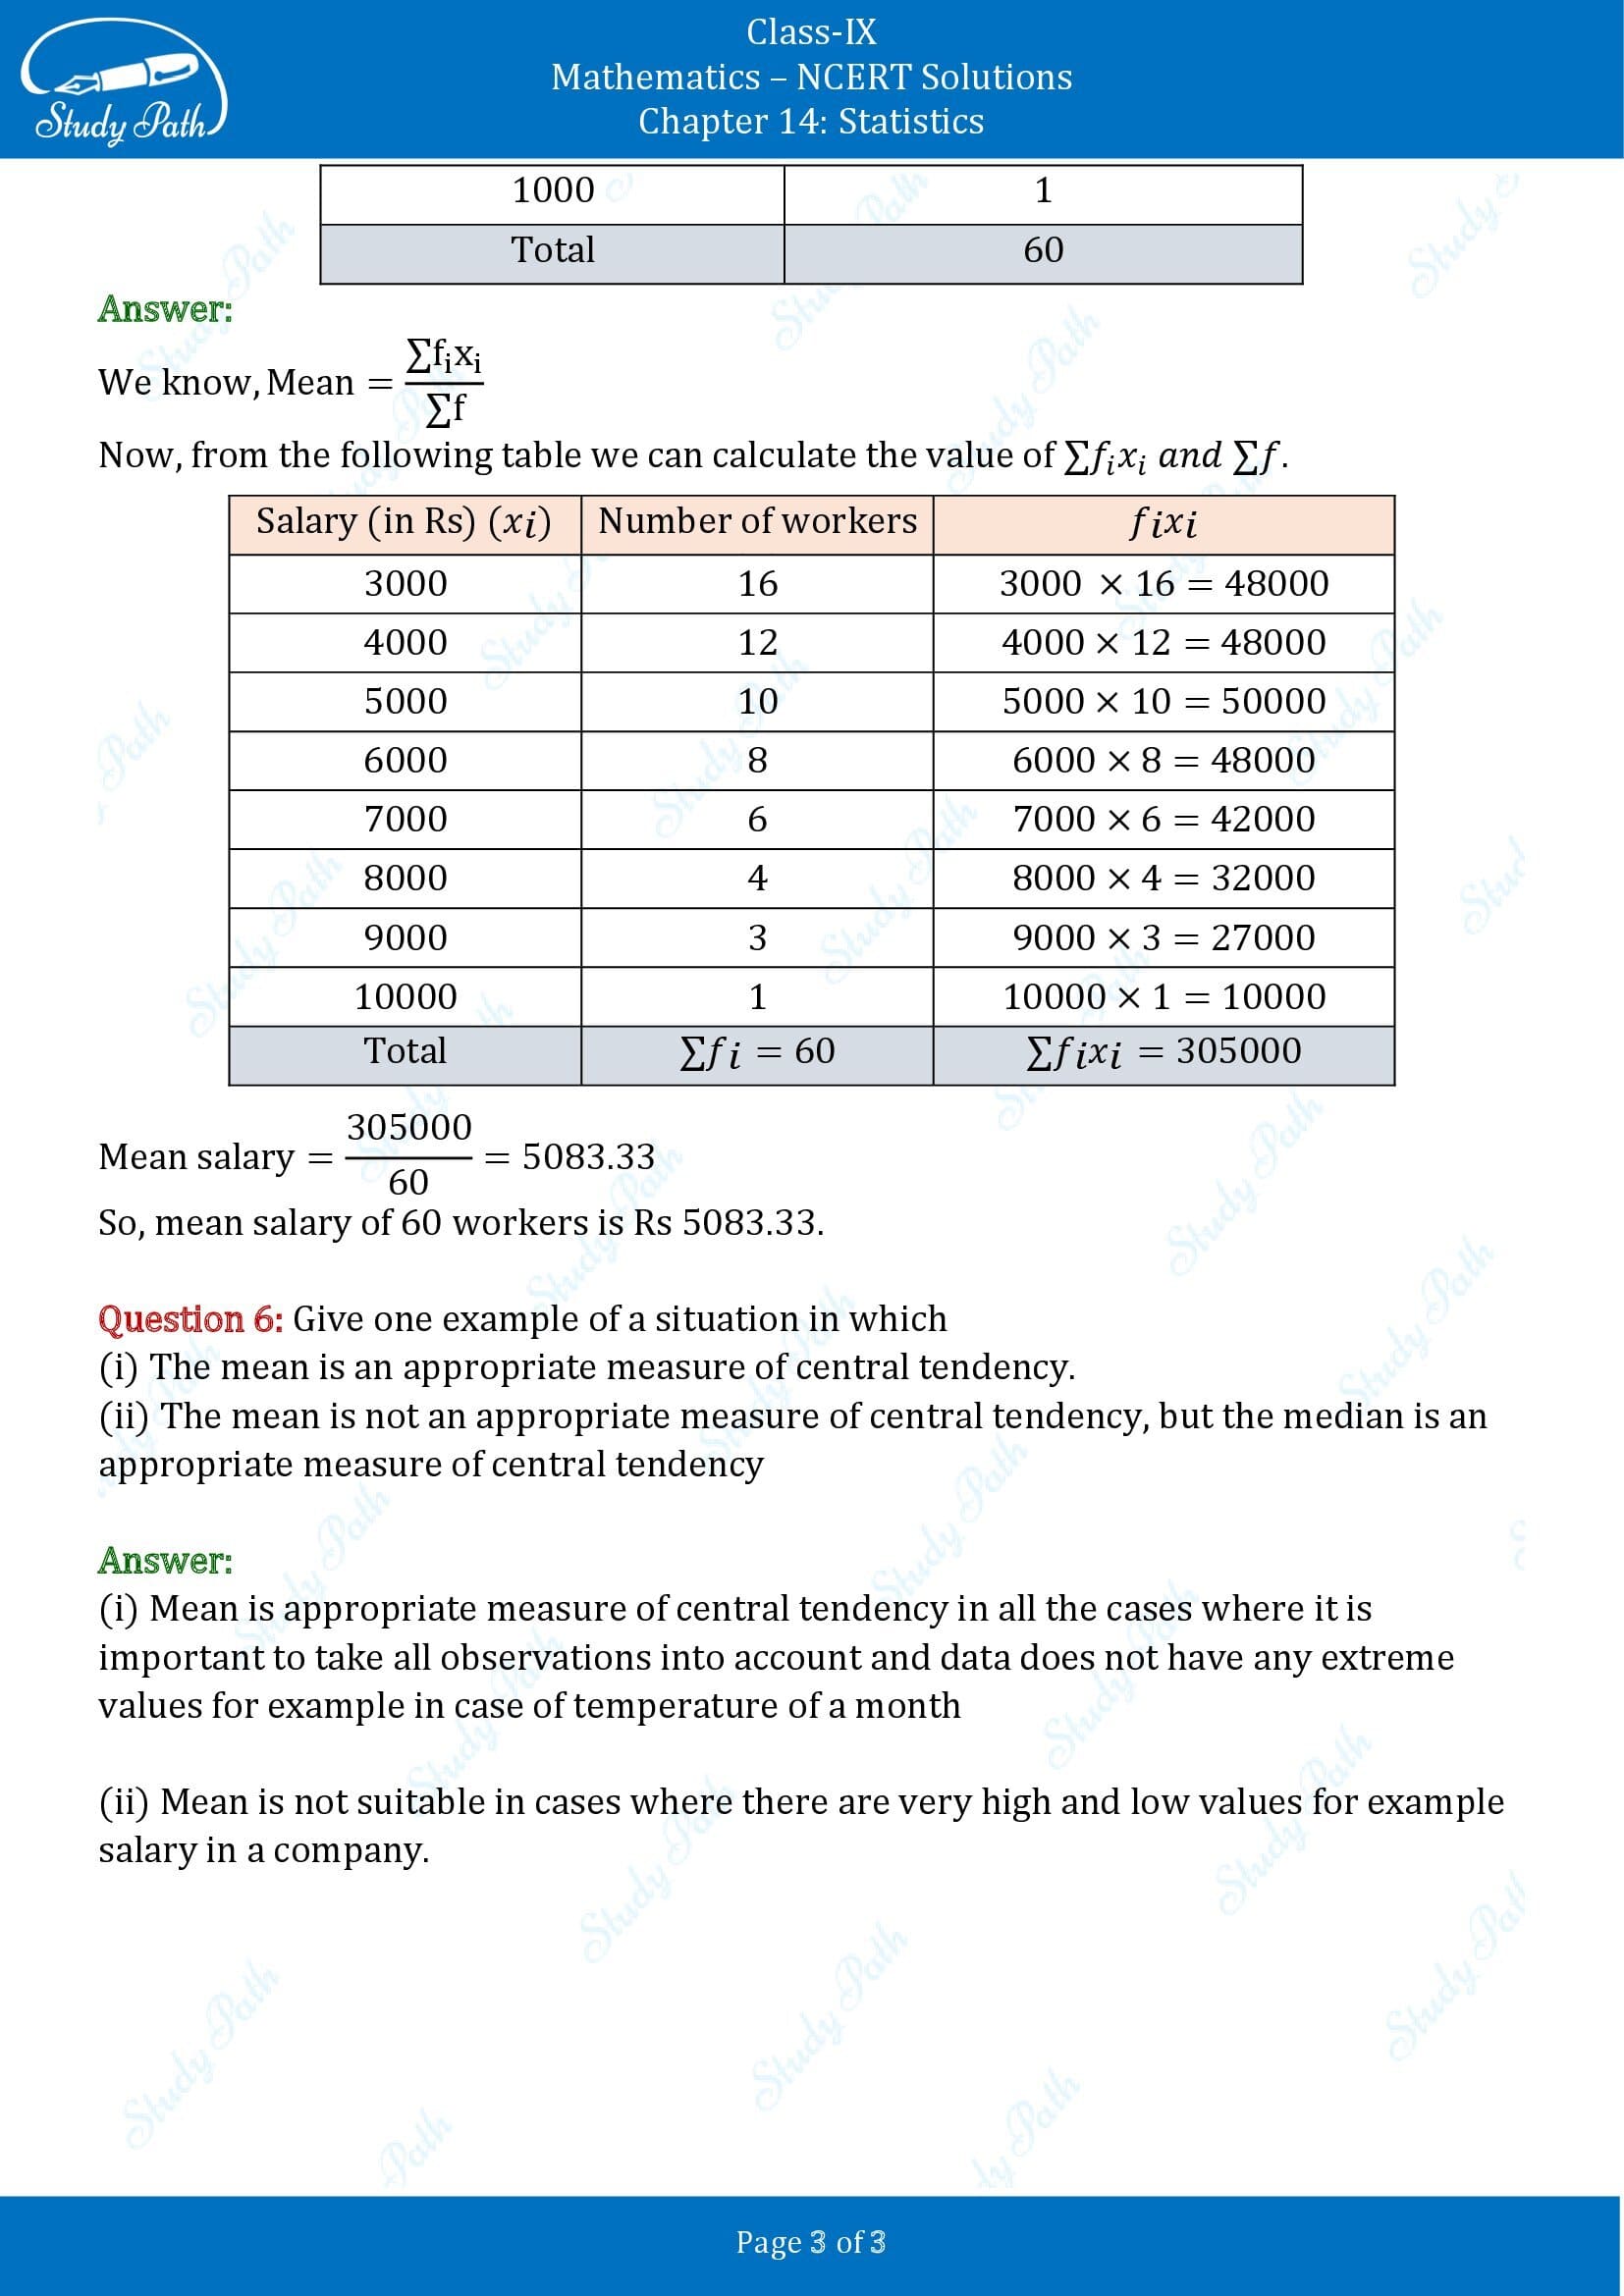 NCERT Solutions for Class 9 Maths Chapter 14 Statistics Exercise 14.4 00003